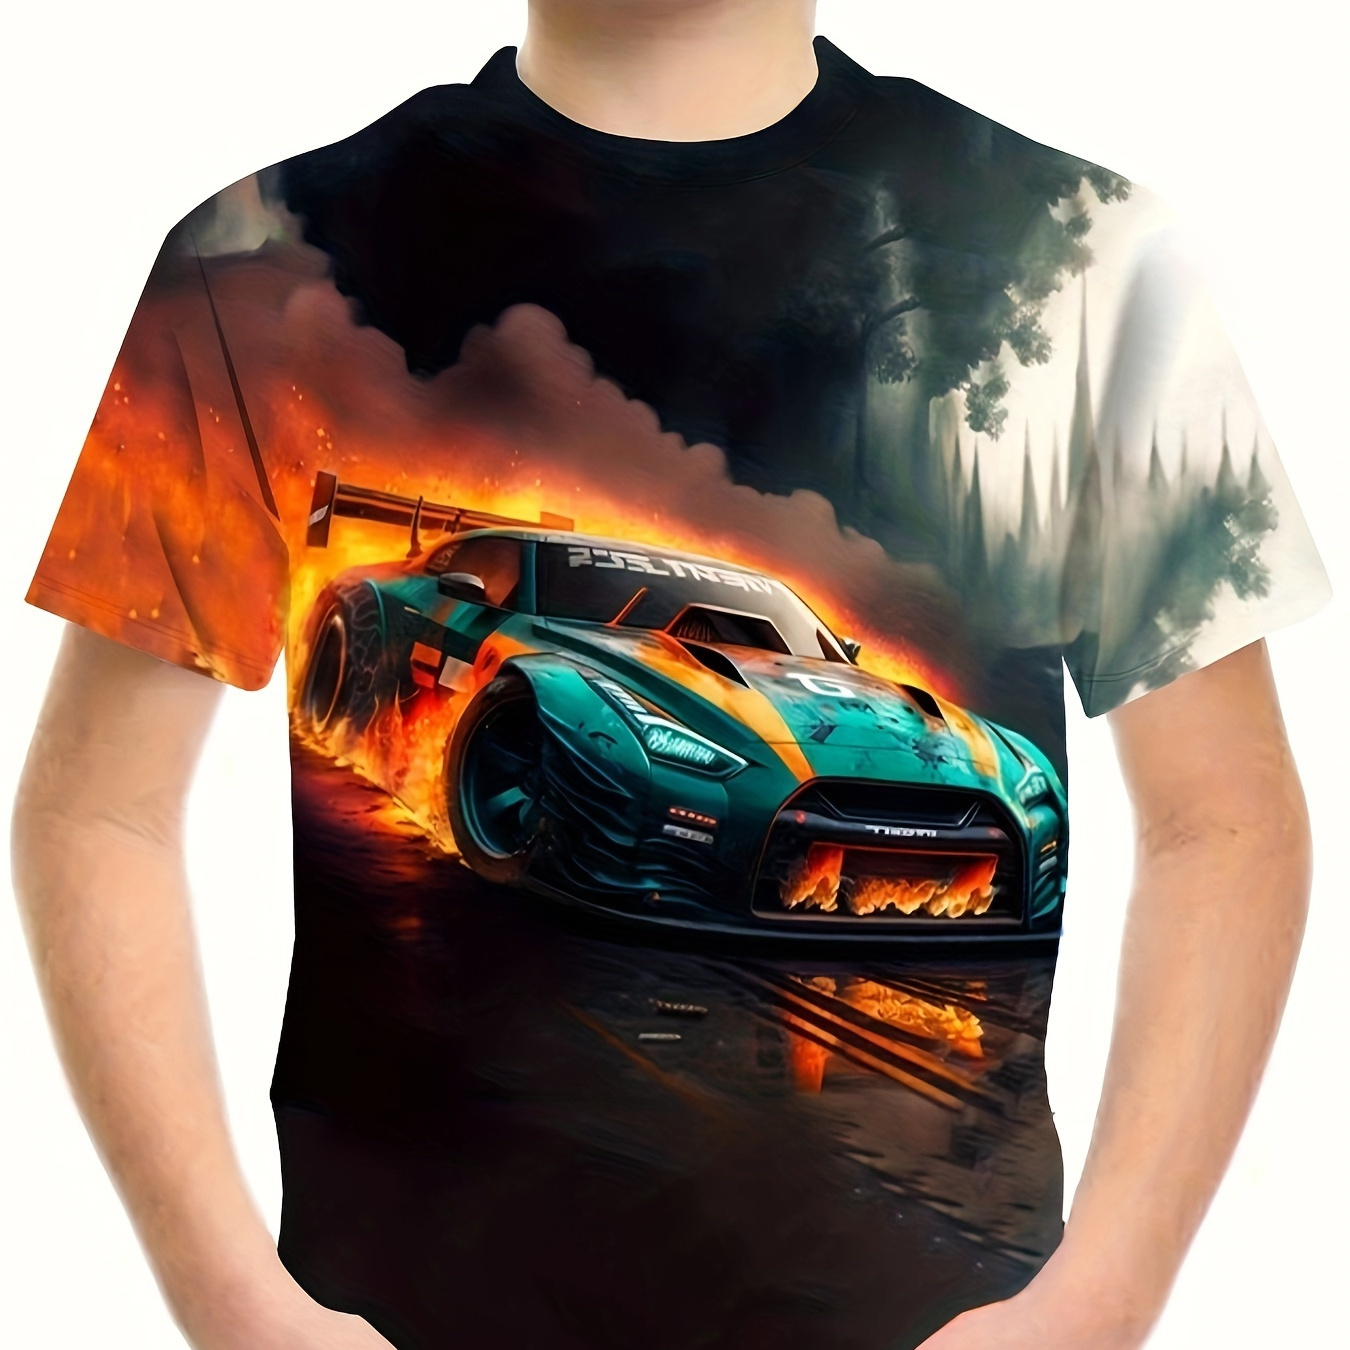 

Cool Flame Racing Car 3d Print T-shirt, Tees For Boys, Casual Short Sleeve T-shirt For Summer Spring Fall